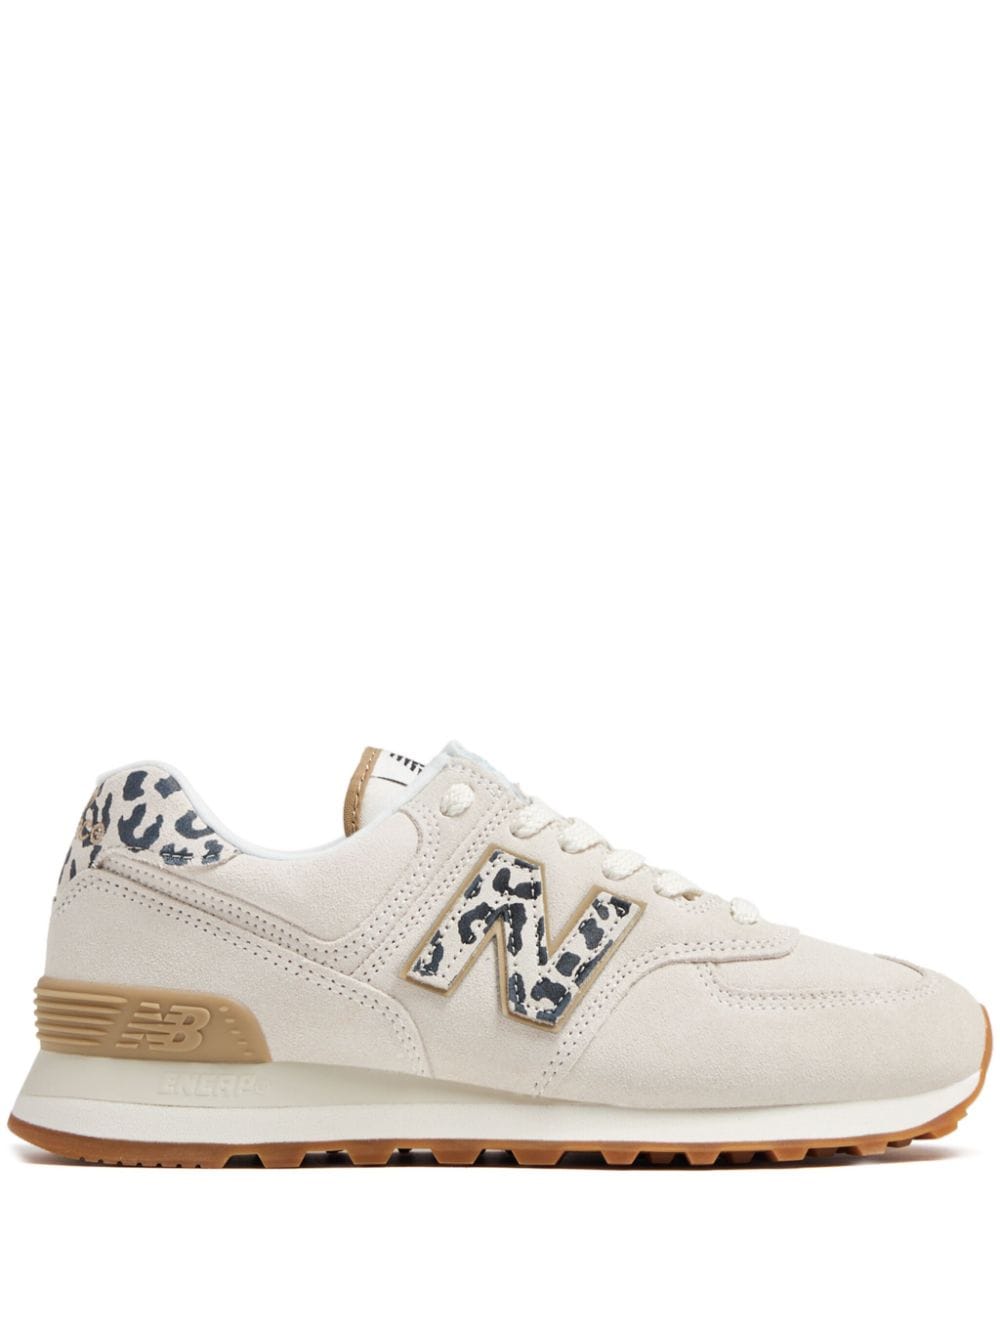 New Balance 574 Lace-up Sneakers In Neutral